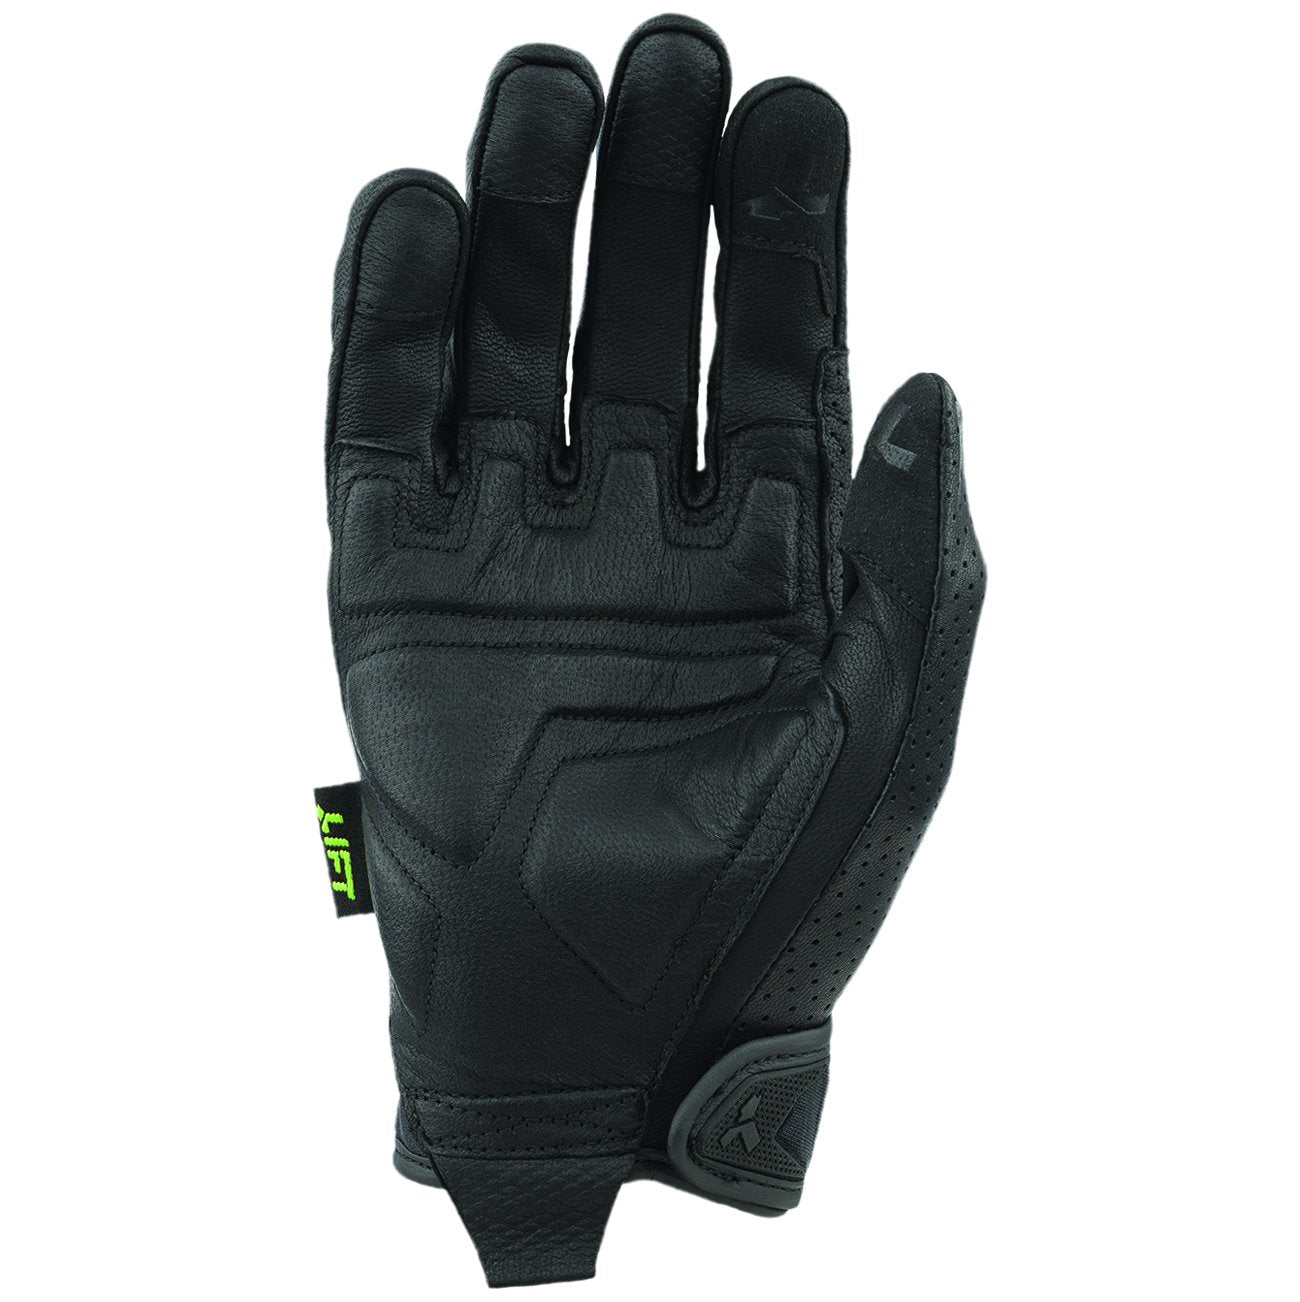 TACKER Winter Glove (Black) with Thinsulate - LIFT Aviation